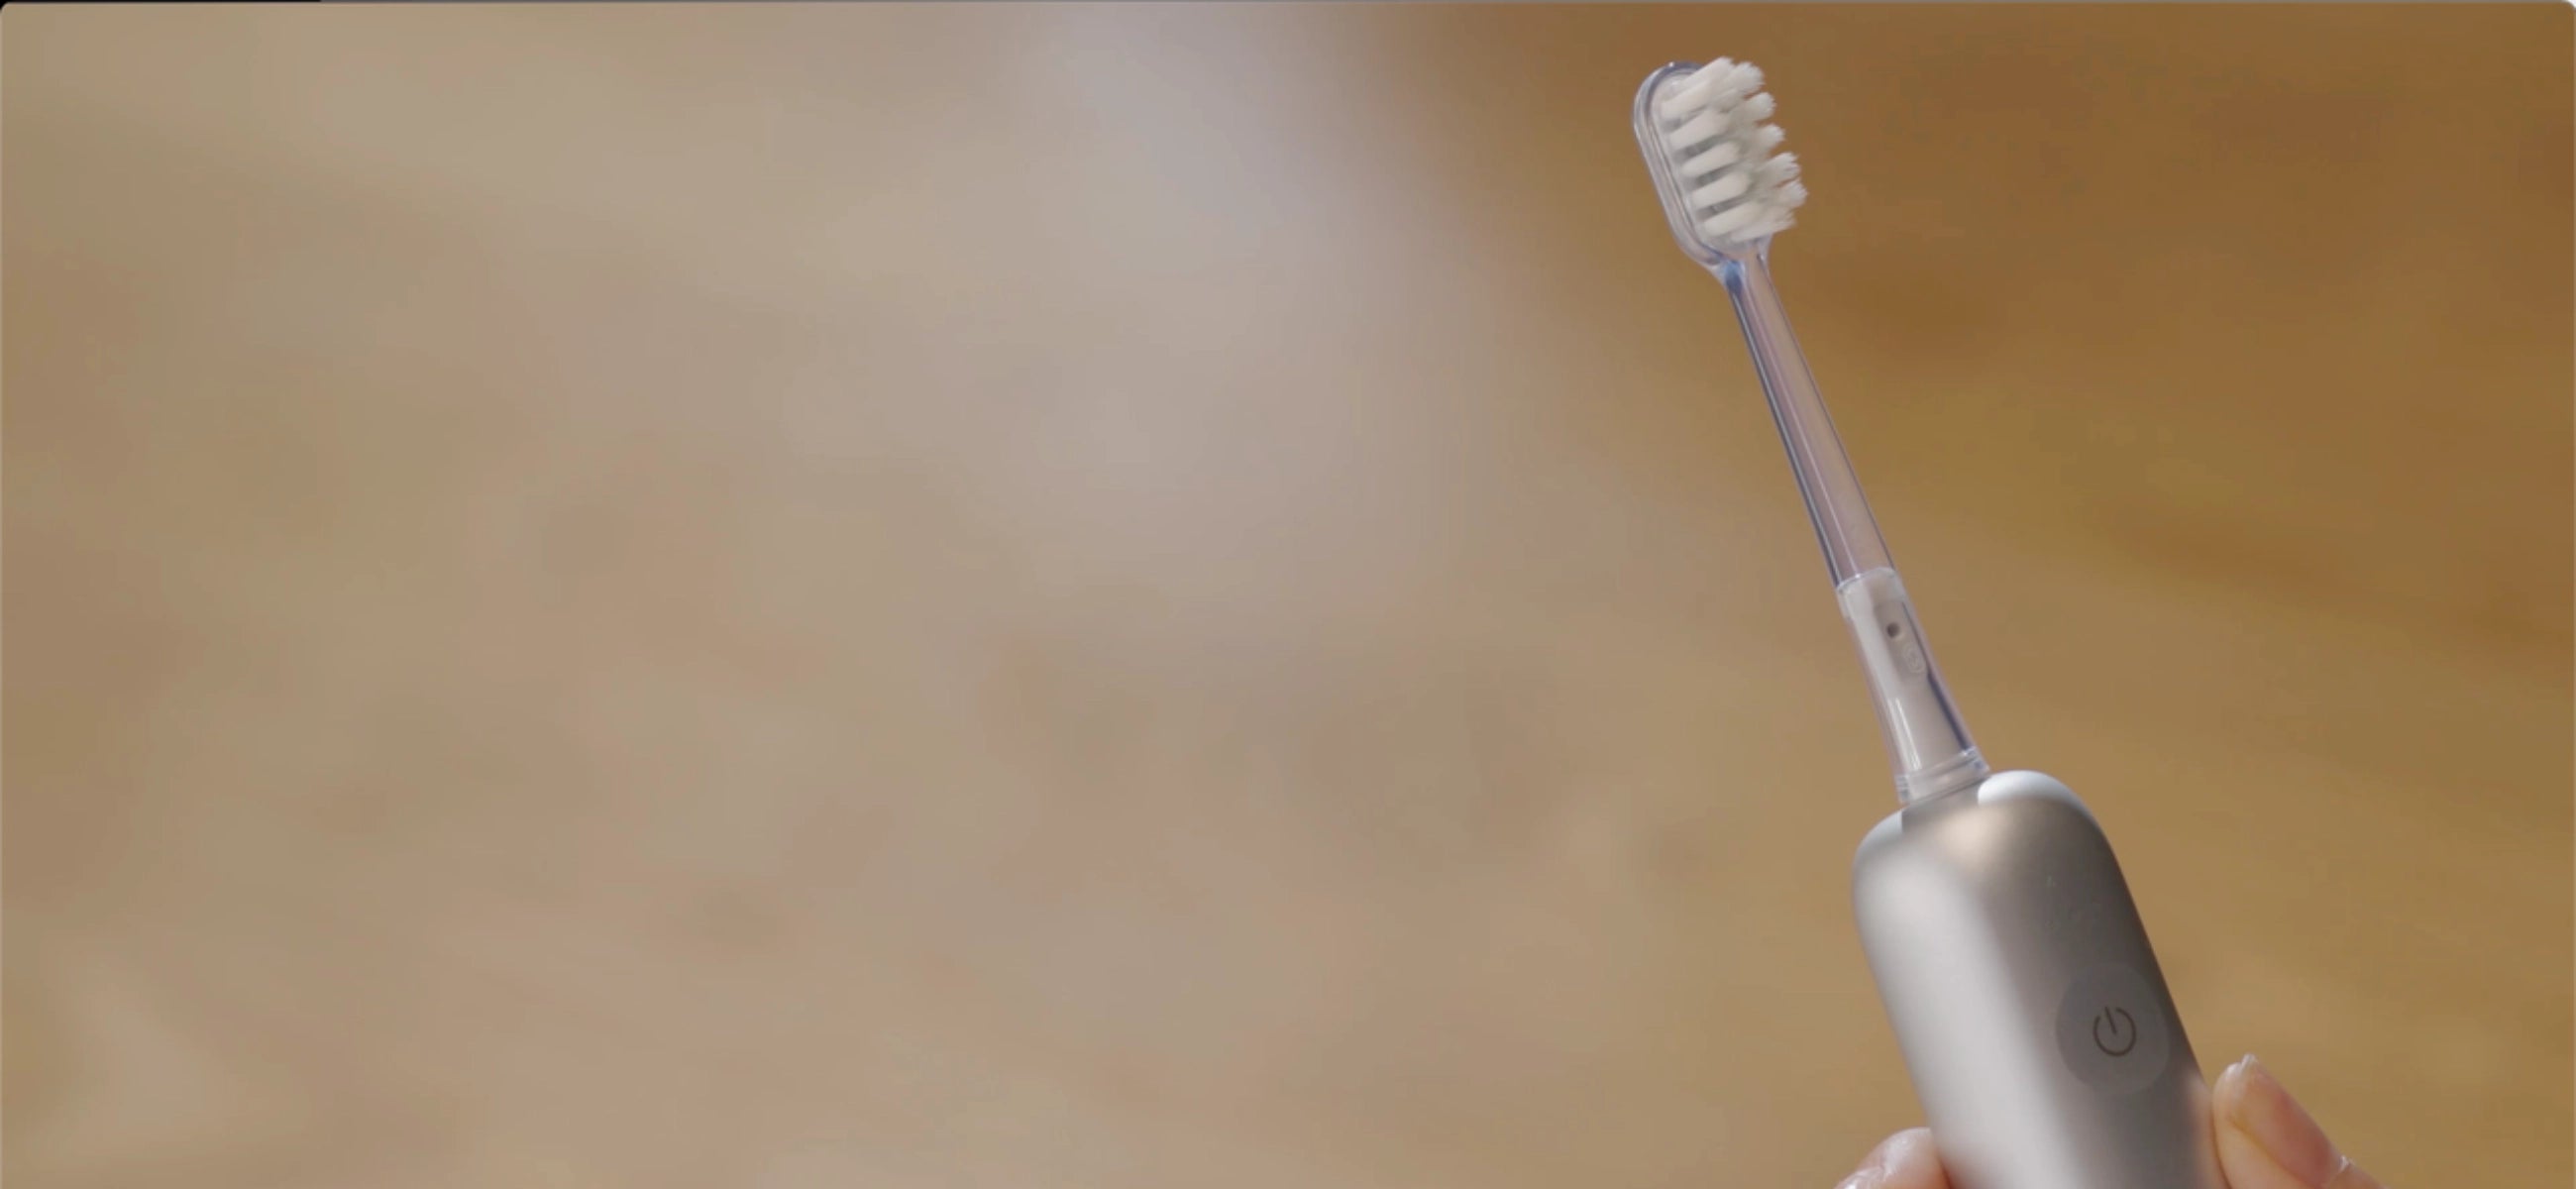 Laifen Wave: How to prevent bristles shedding & filaments cracking?